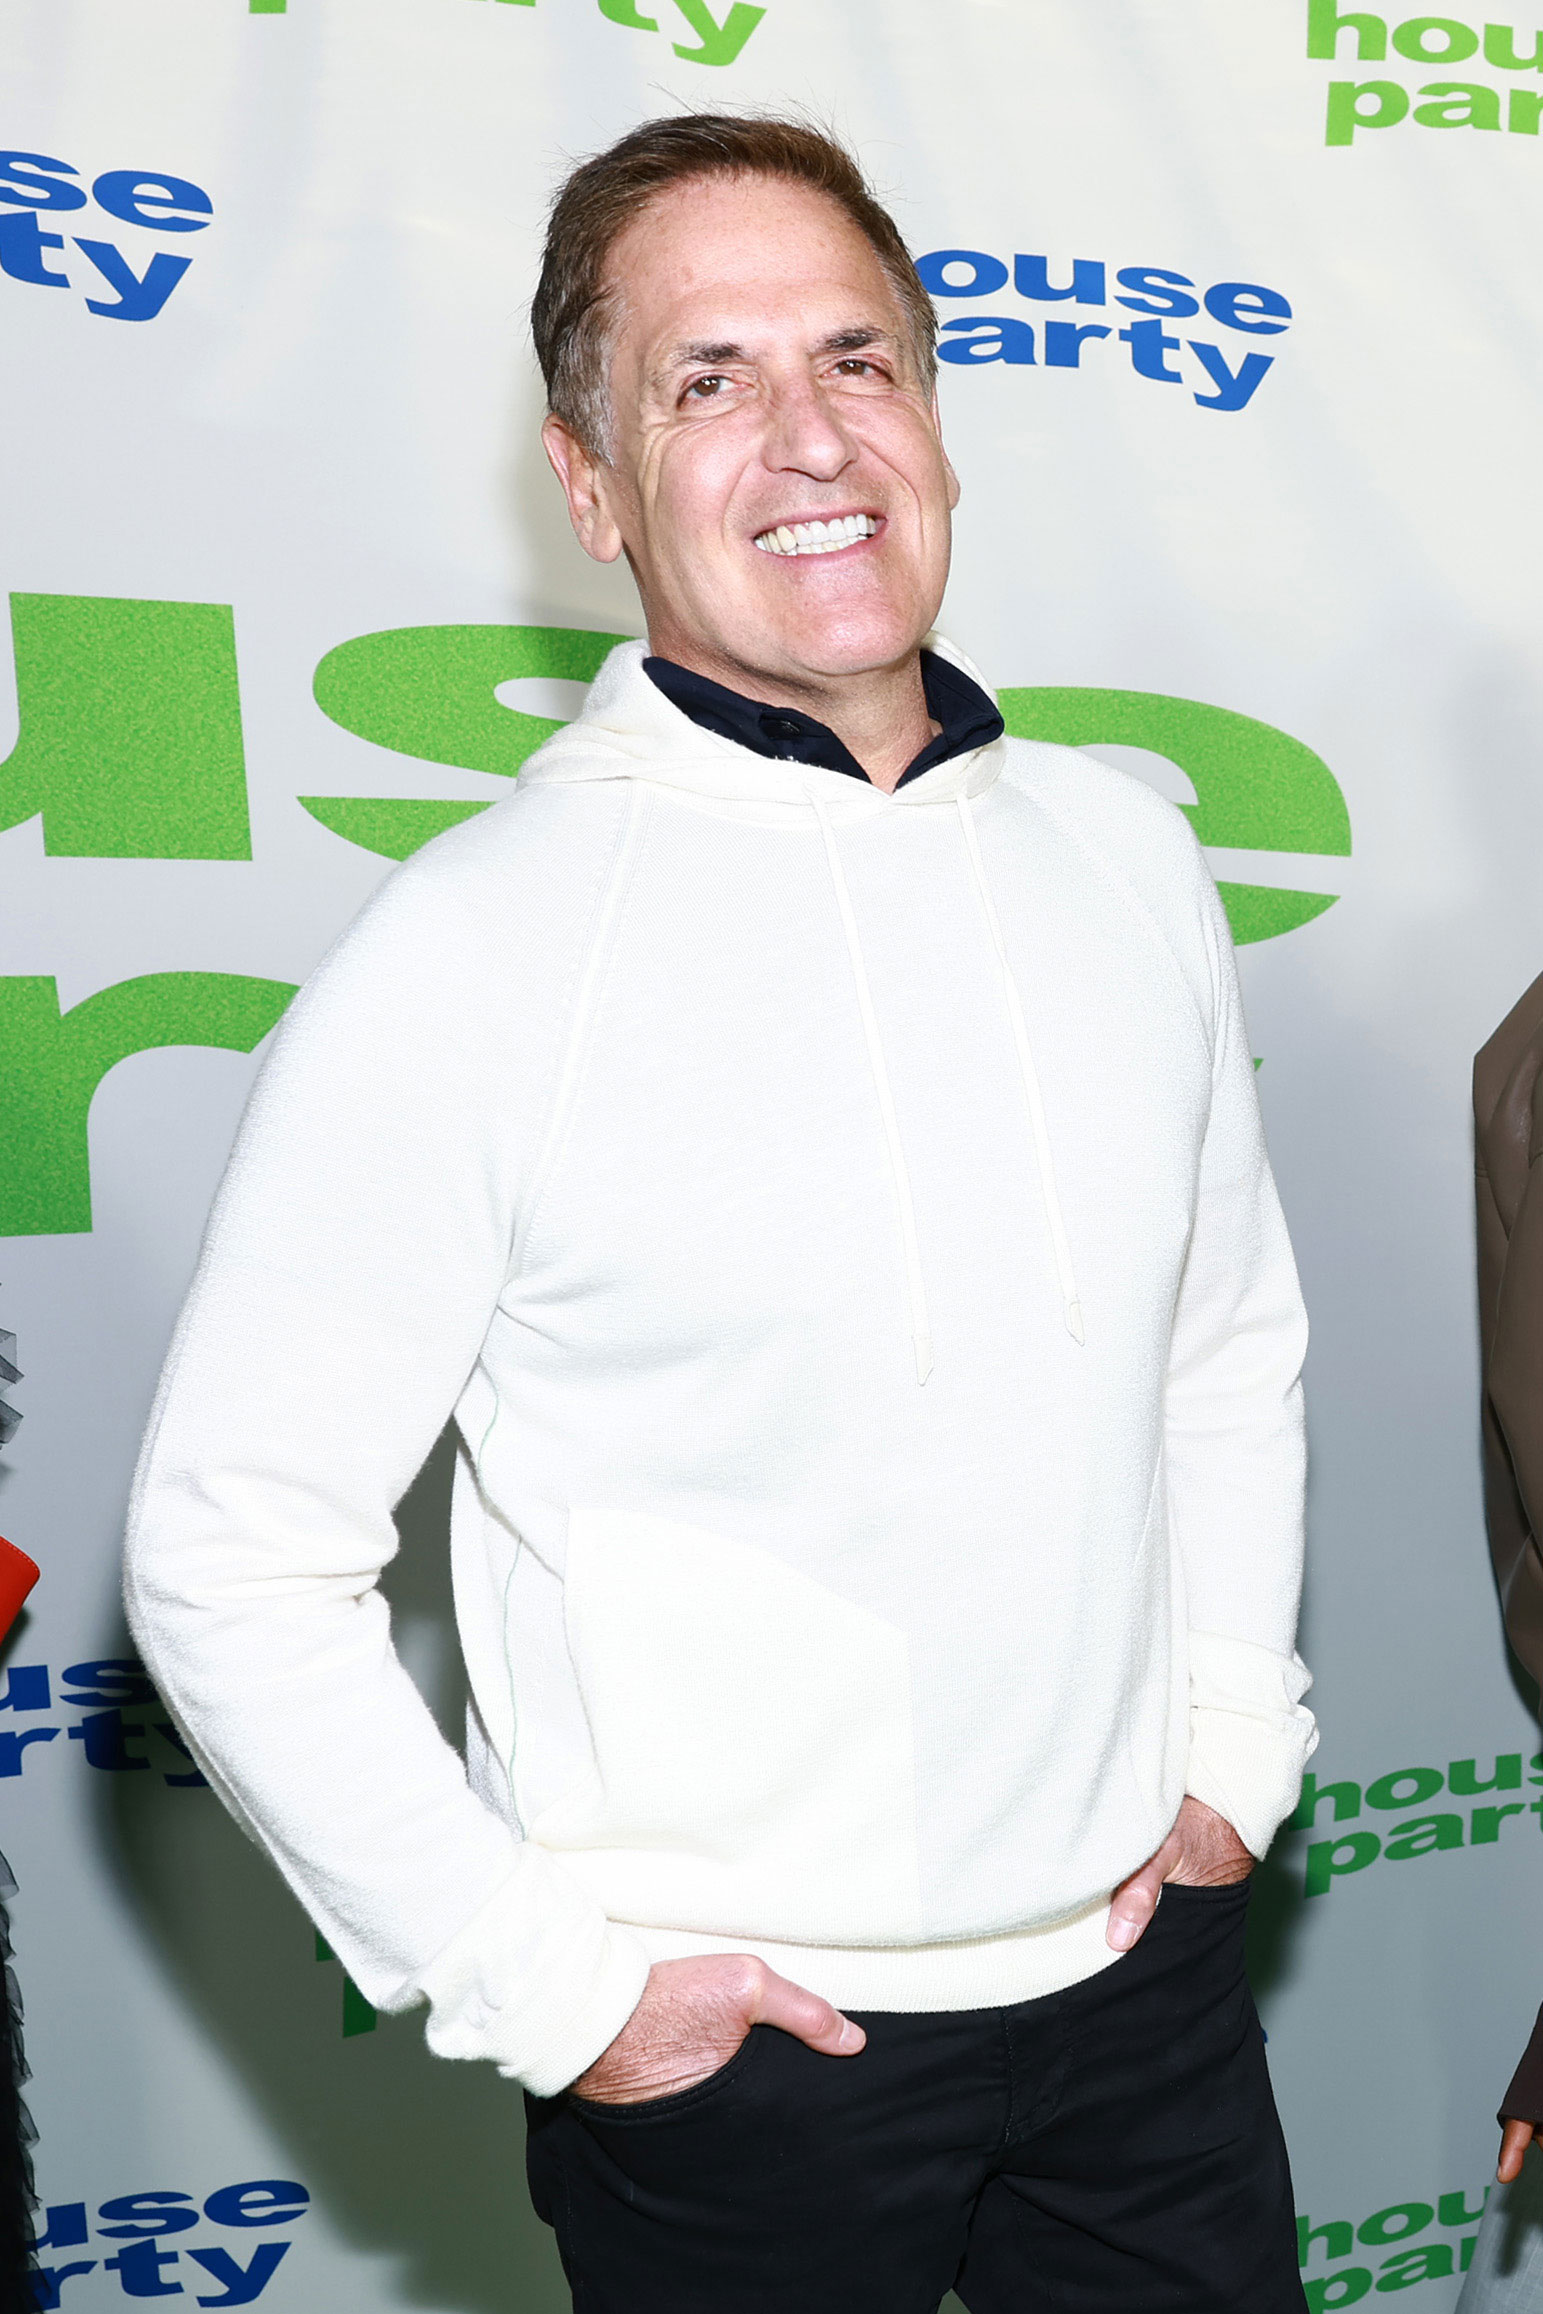 Mark Cuban attends the Special Red Carpet Screening for New Line Cinema’s “House Party” at TCL Chinese 6 Theatres in Hollywood, Calif., on Jan. 11, 2023.